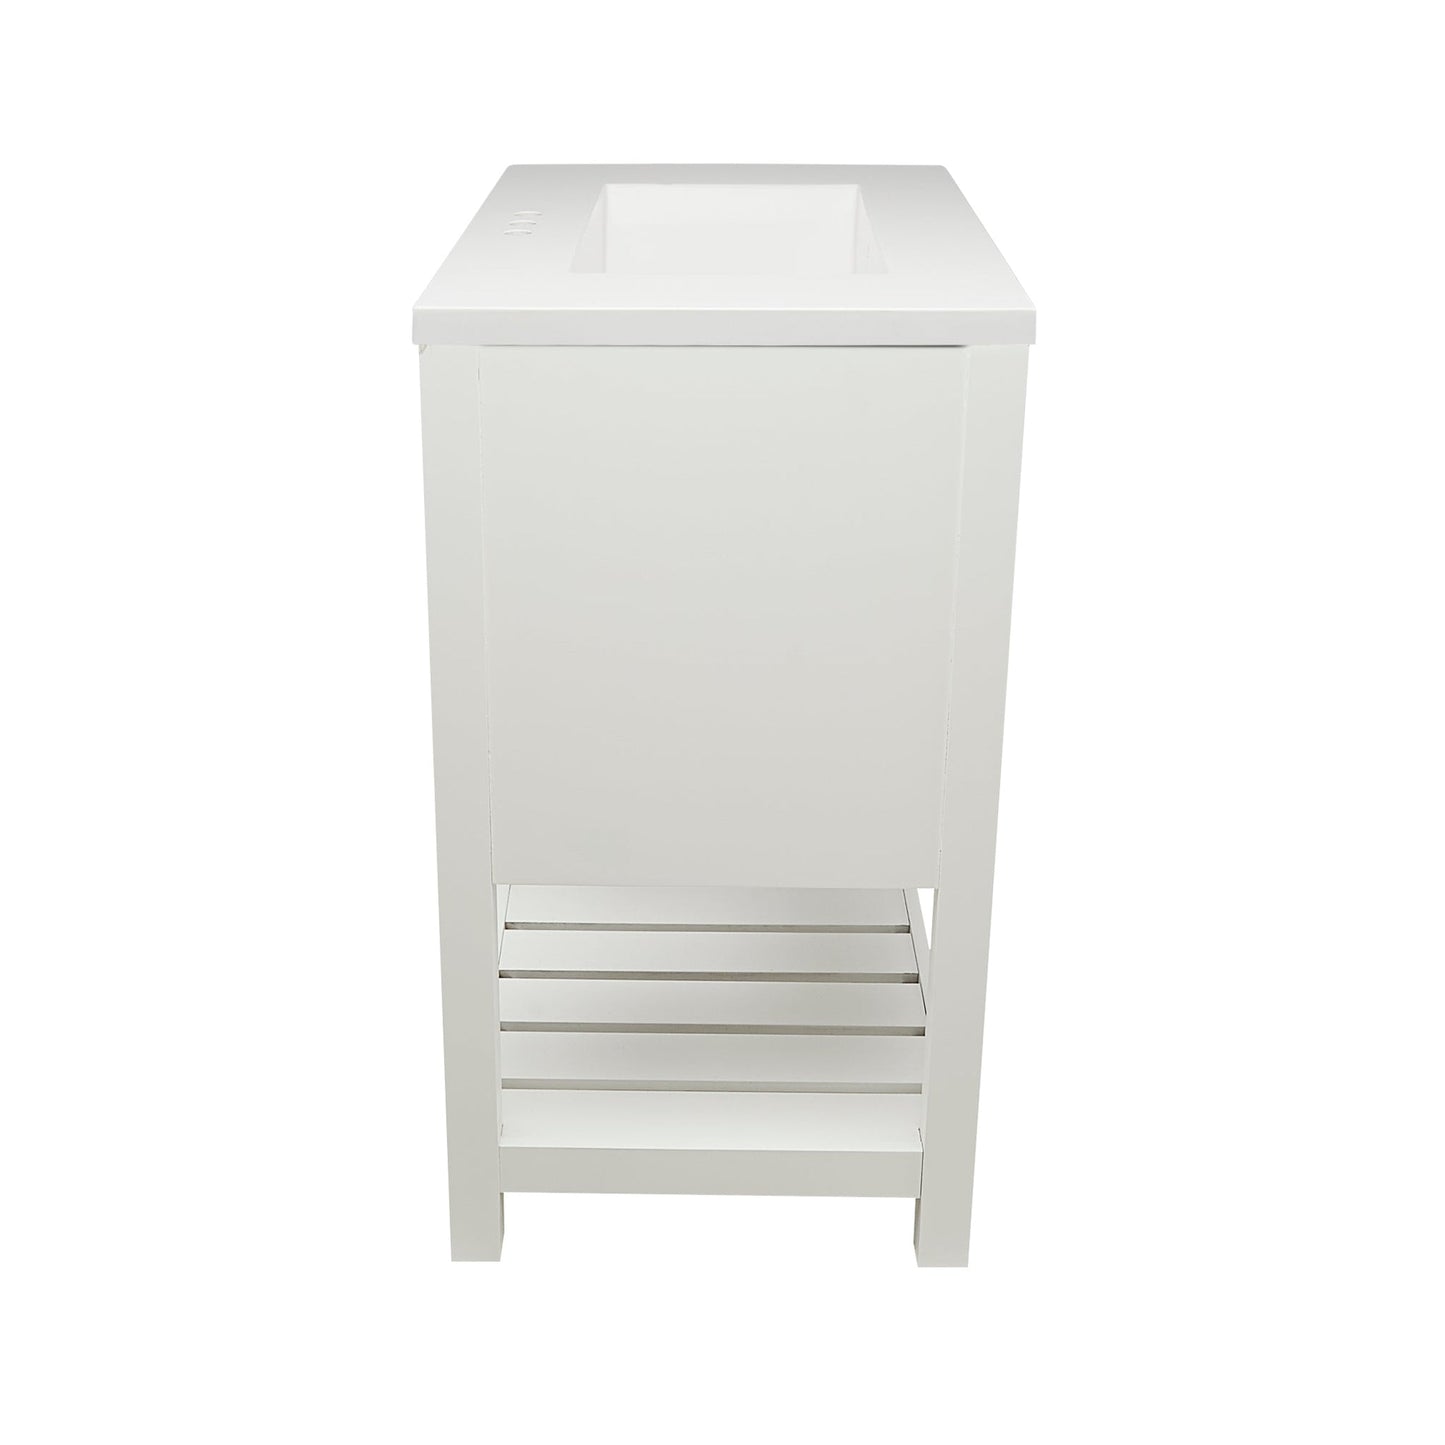 Ella's Bubbles Tremblant 25" White Bathroom Vanity With White Cultured Marble Vanity Top and Sink